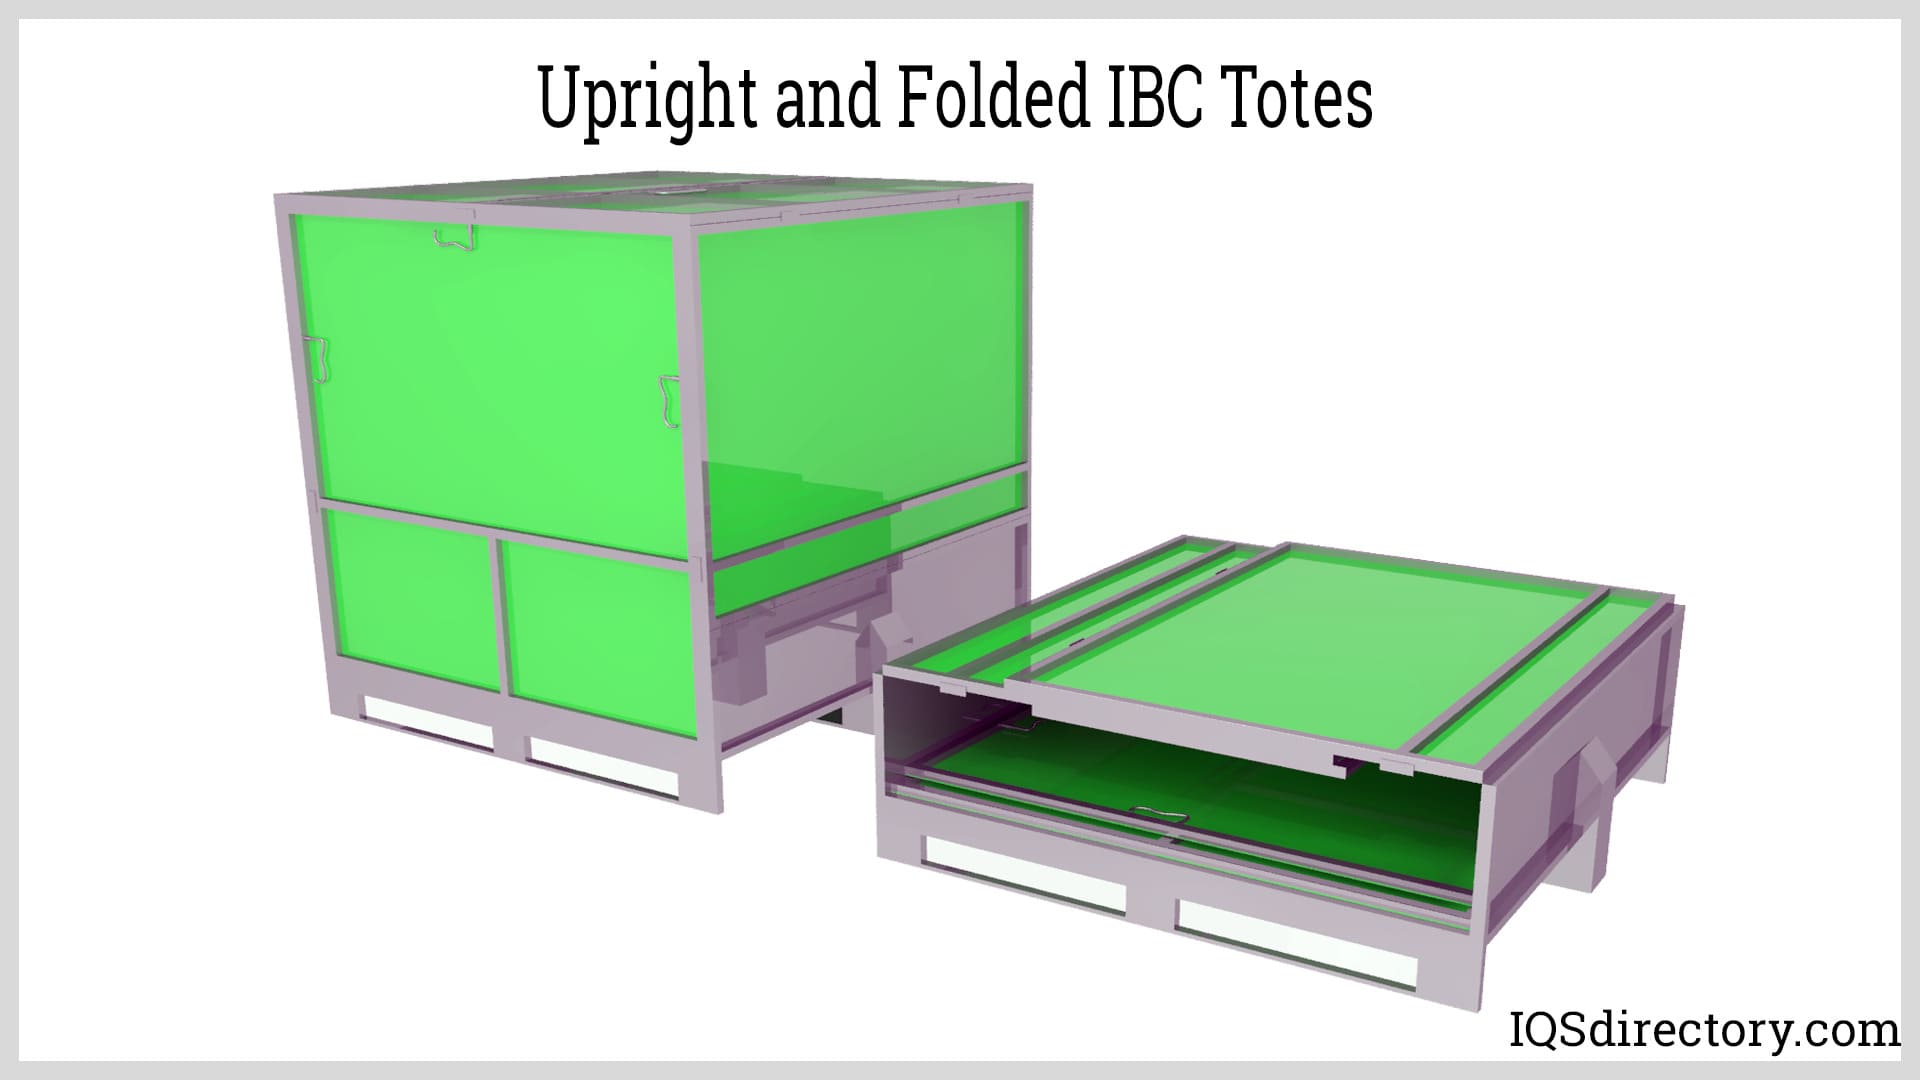 Upright and Folded IBC Totes